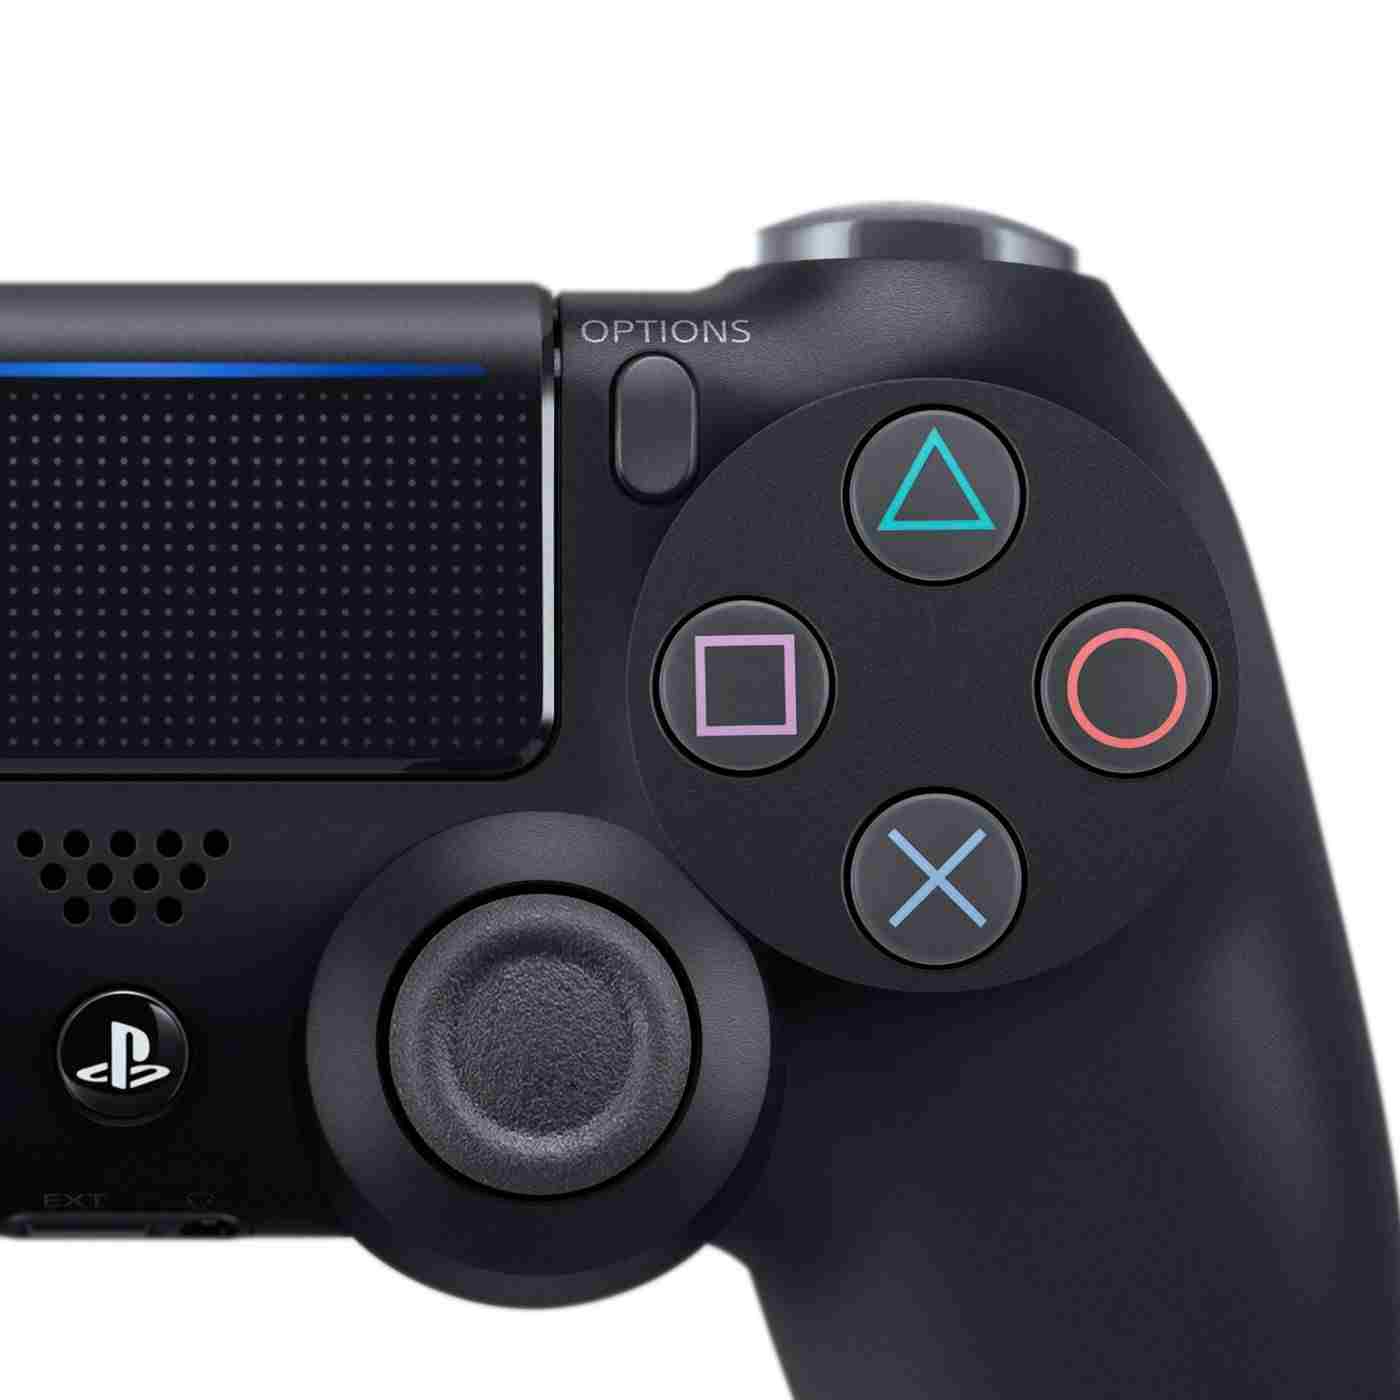 Choose options button on PS4 controller to delete games